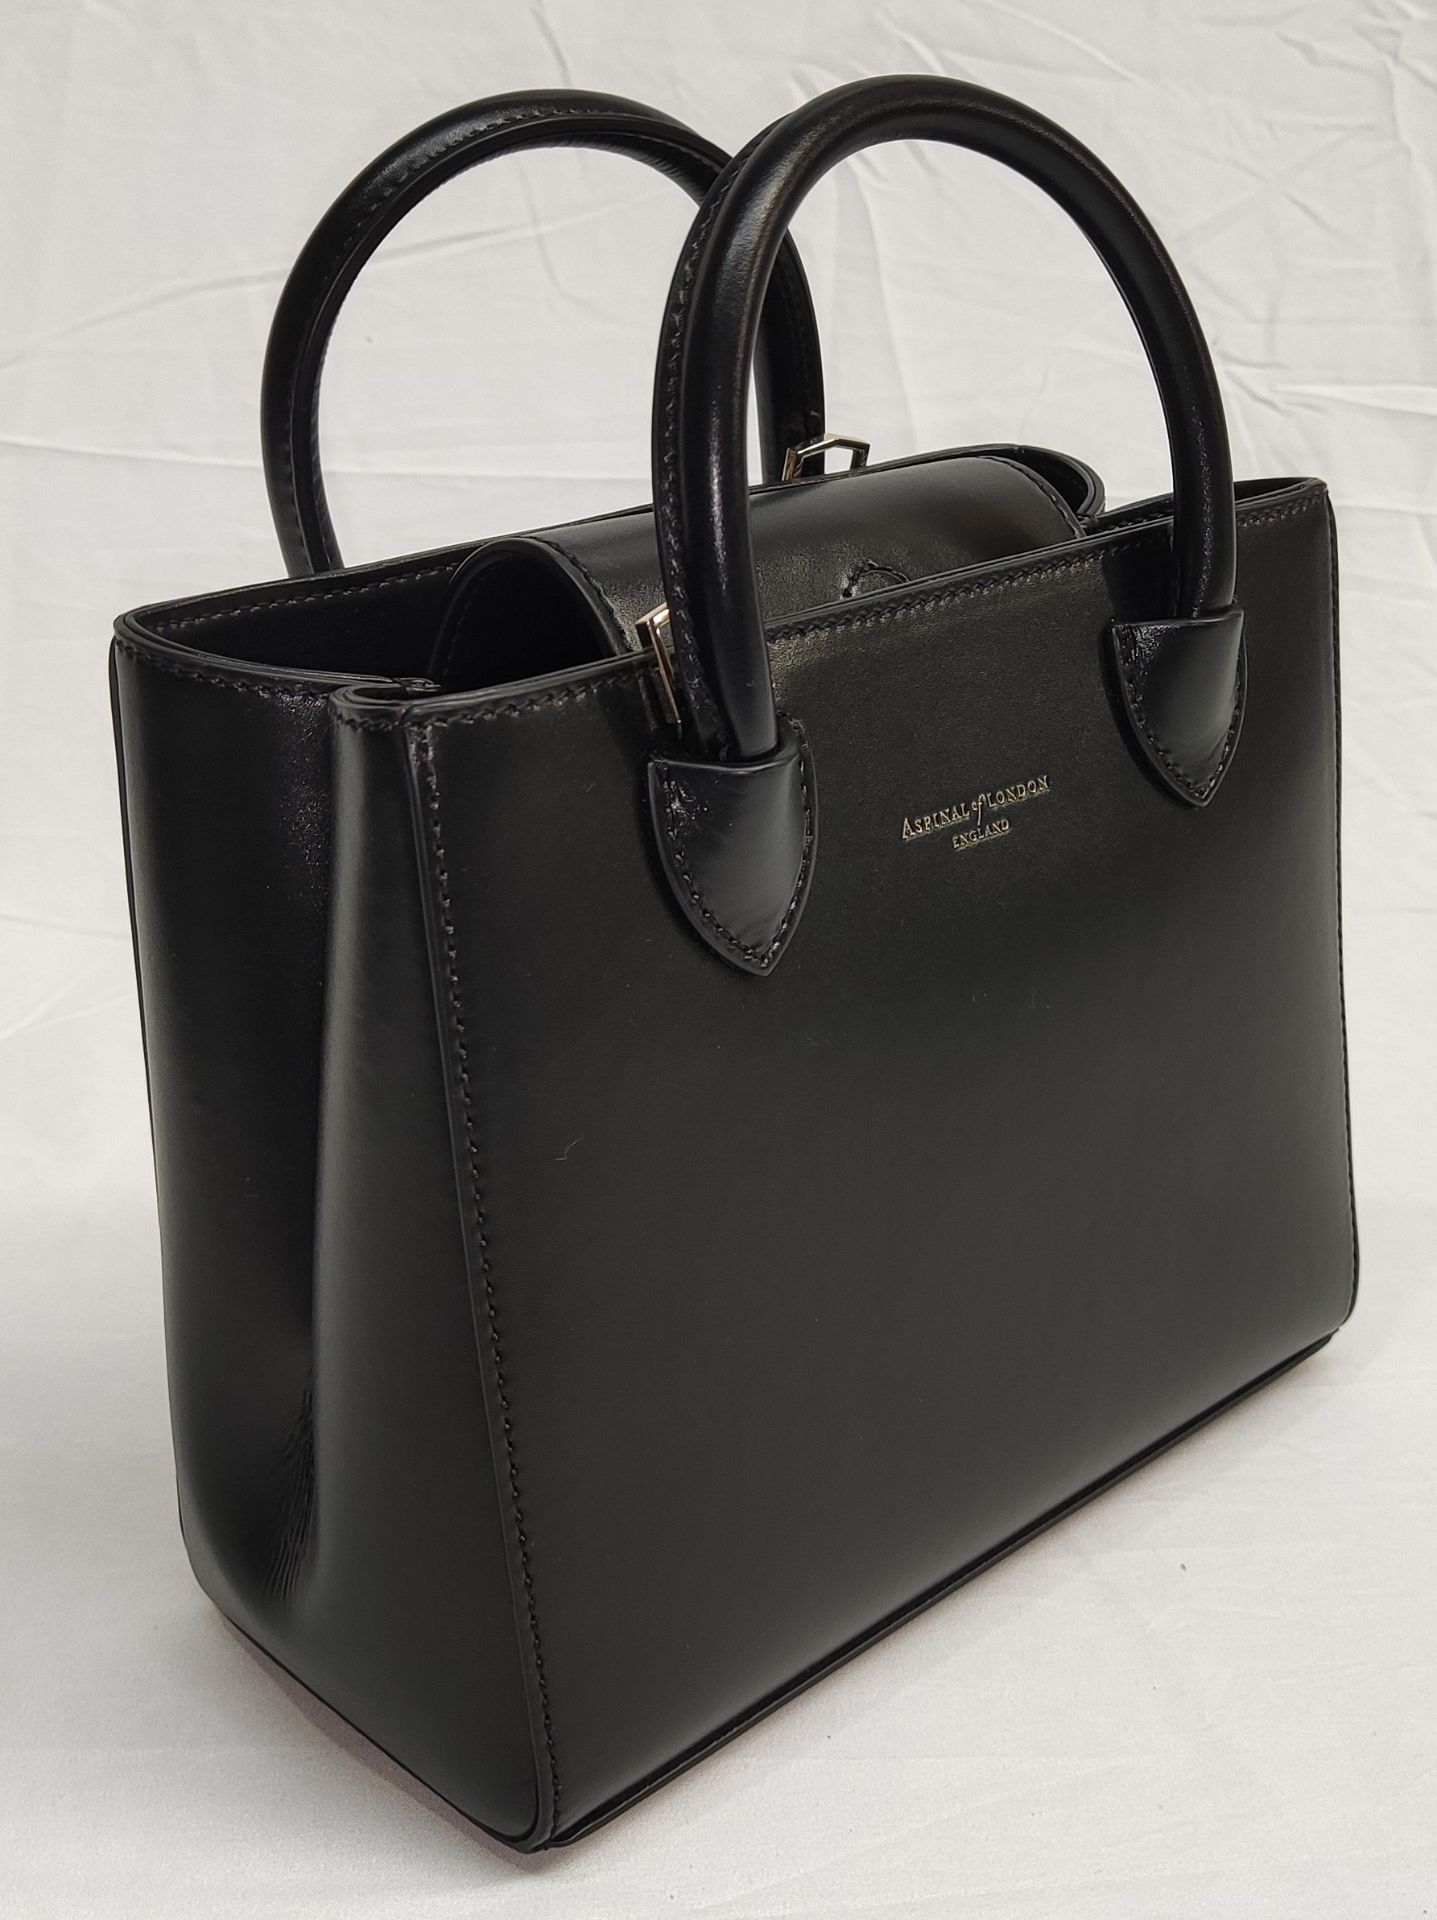 1 x ASPINAL OF LONDON Mini Madison Tote In Smooth Black - Boxed - Original RRP £495 - Ref: 7242894/ - Image 2 of 20